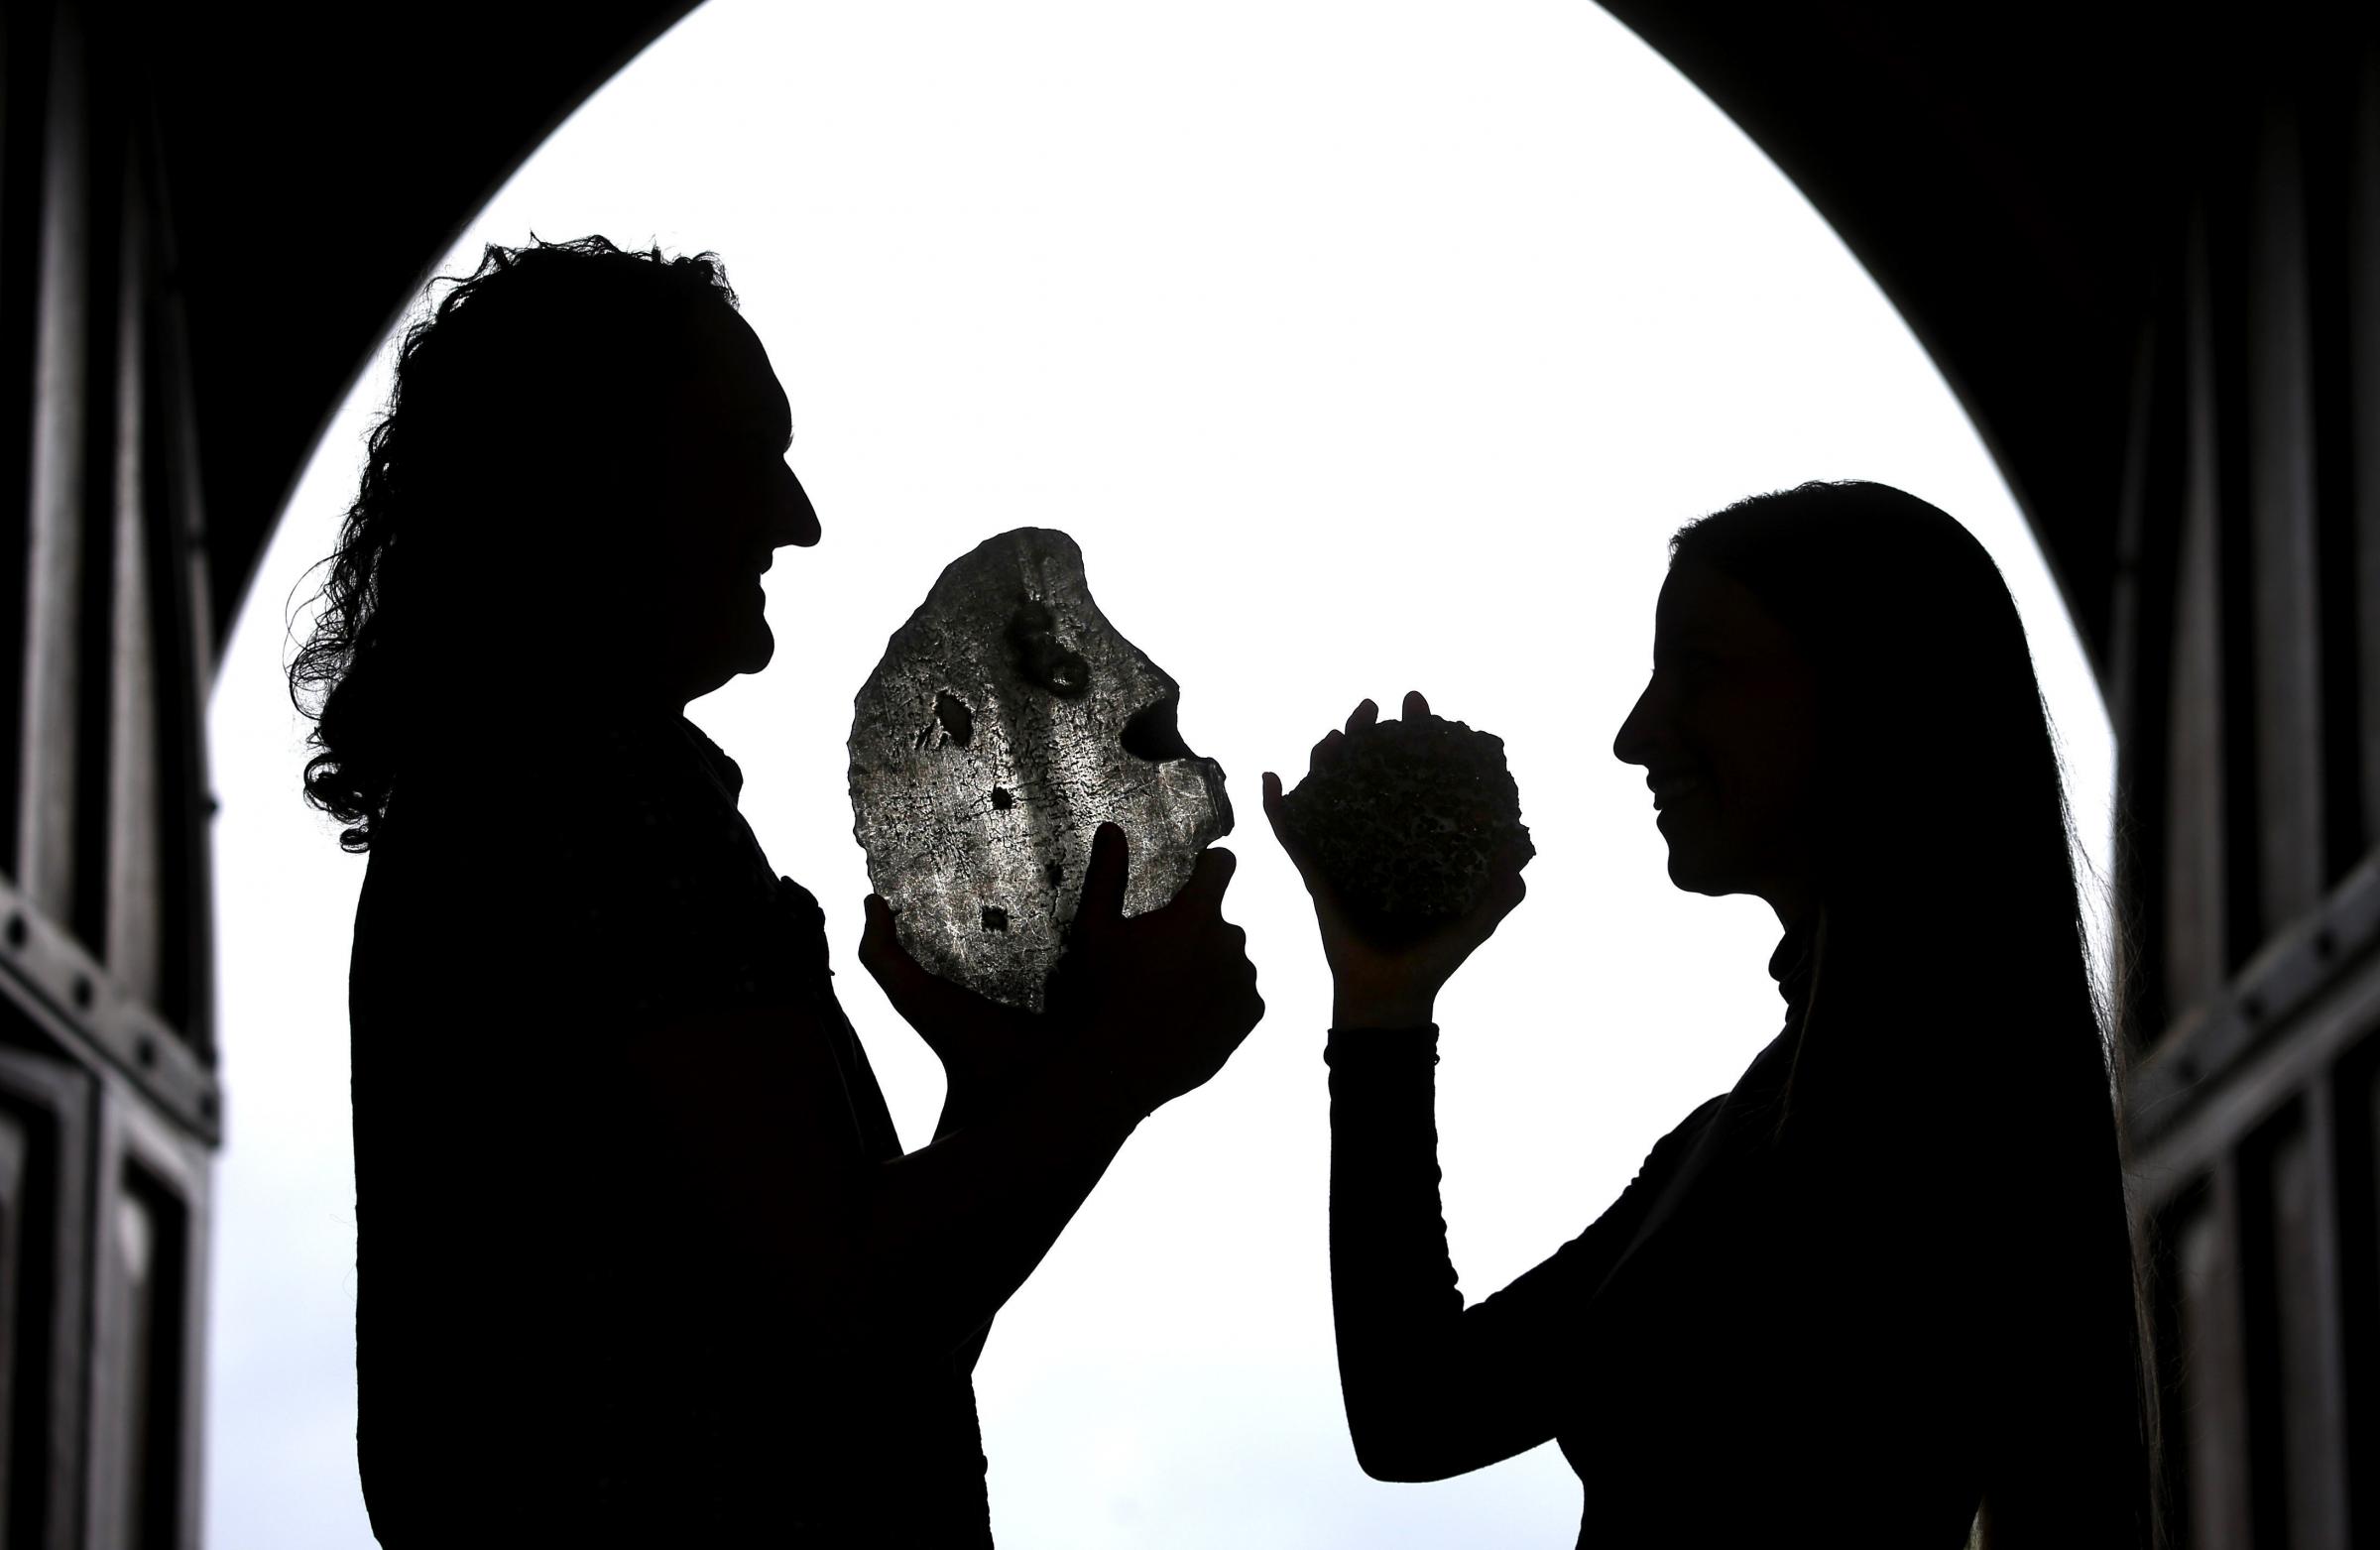 Glasgow University researcher Luke Daly with partner Mire Ihasz hold meteorites from the Hunterian Picture: Gordon Terris